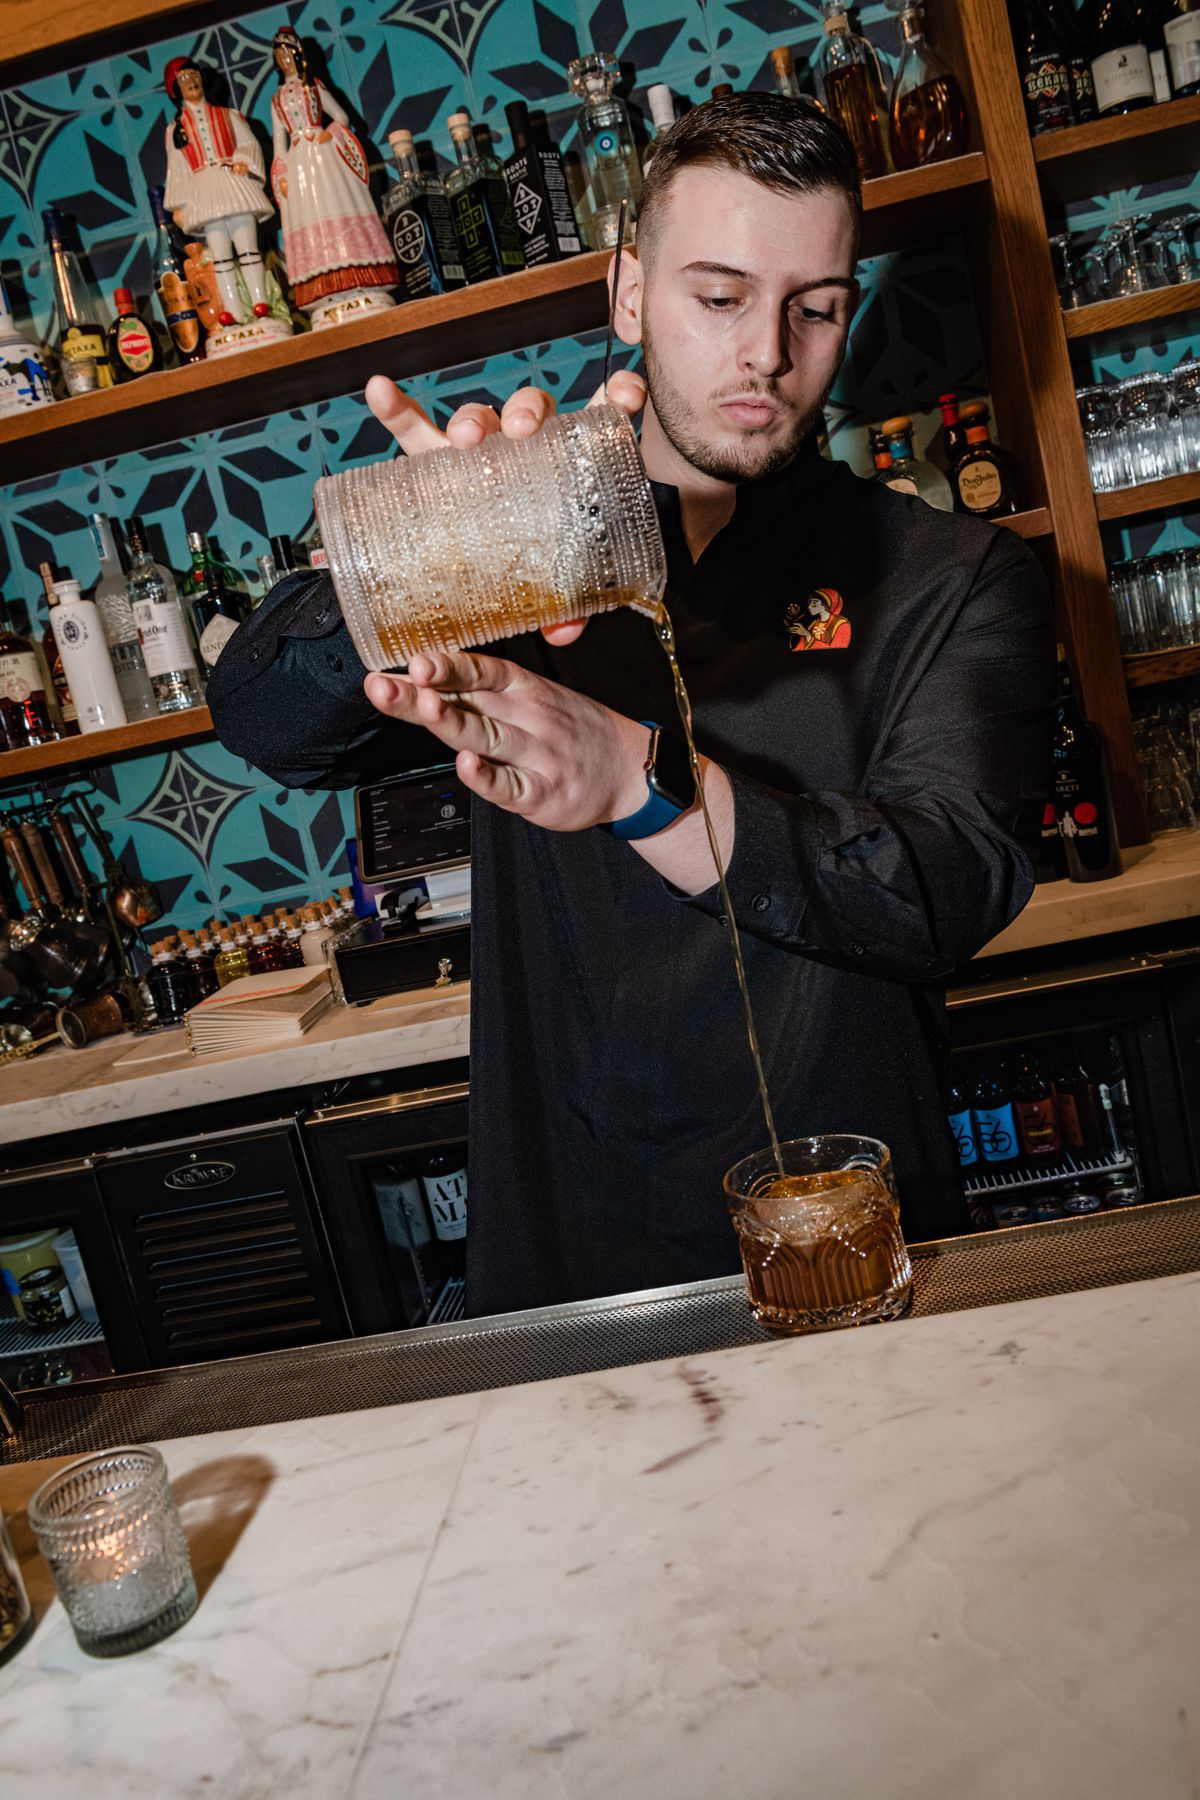 A man stands in a black uniform pouring a brown liquid into a cocktail glass.